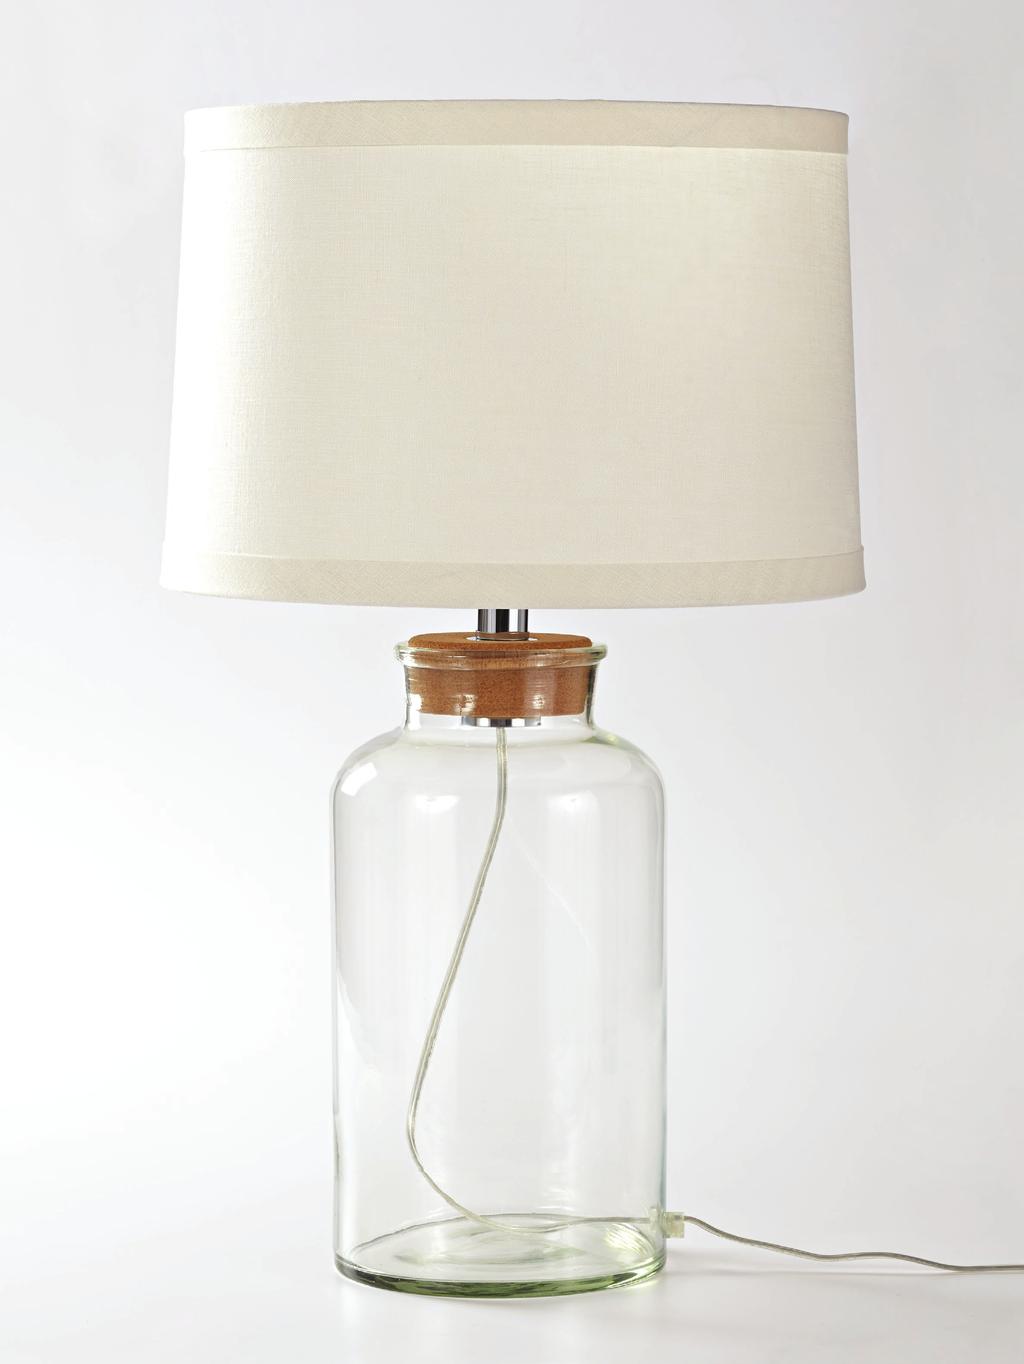 WHAT TO DO WITH LAMPSHADES Turn basic into beautiful with 10 illuminating ideas using fabric, paper, paint, dye, and